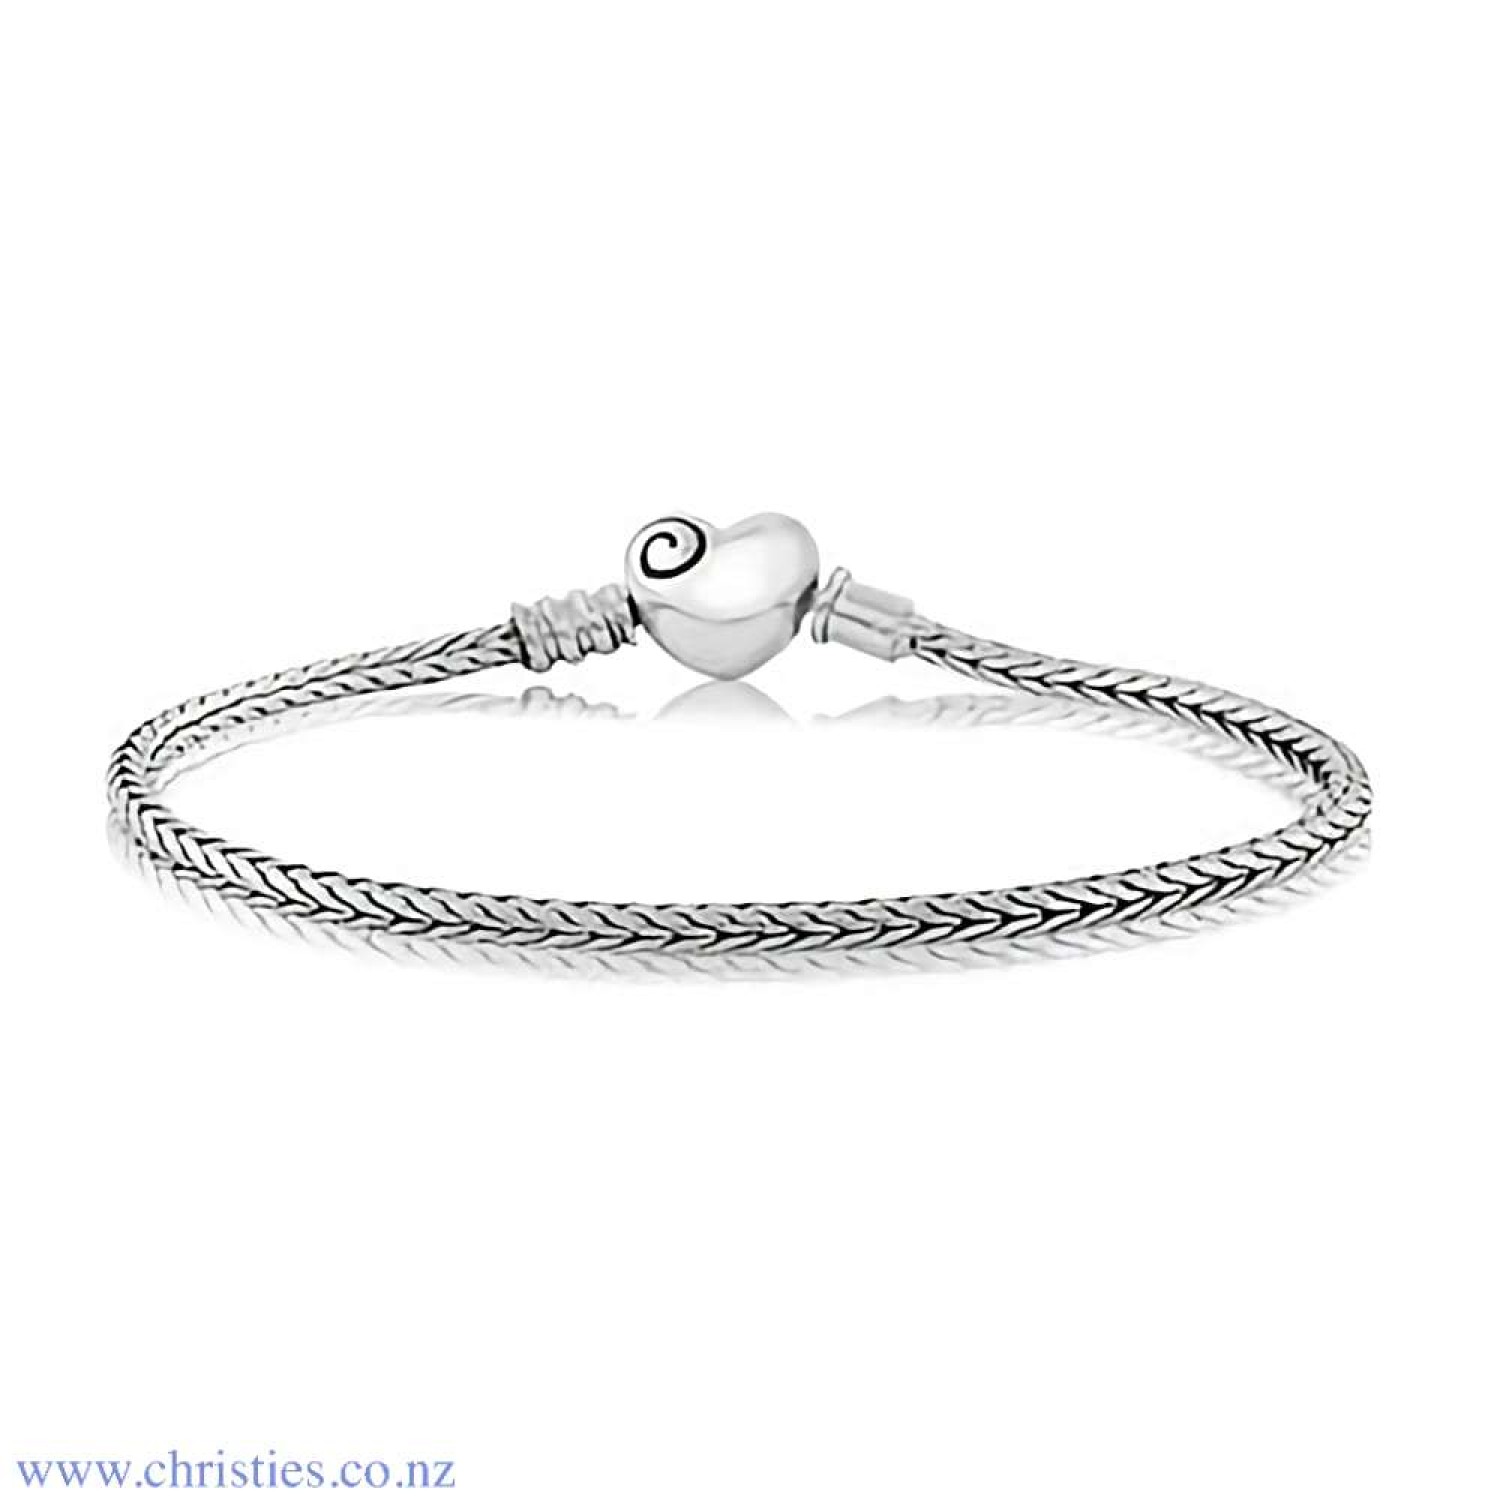 3B11052 Evolve Jewellery Heart Clasp Bracelet. Beautifully engraved with a koru representing new beginnings and eternal growth, Evolves gorgeous Heart Clasp celebrates the deep bonds we share with our loved ones. A specially chosen chain design creates a 